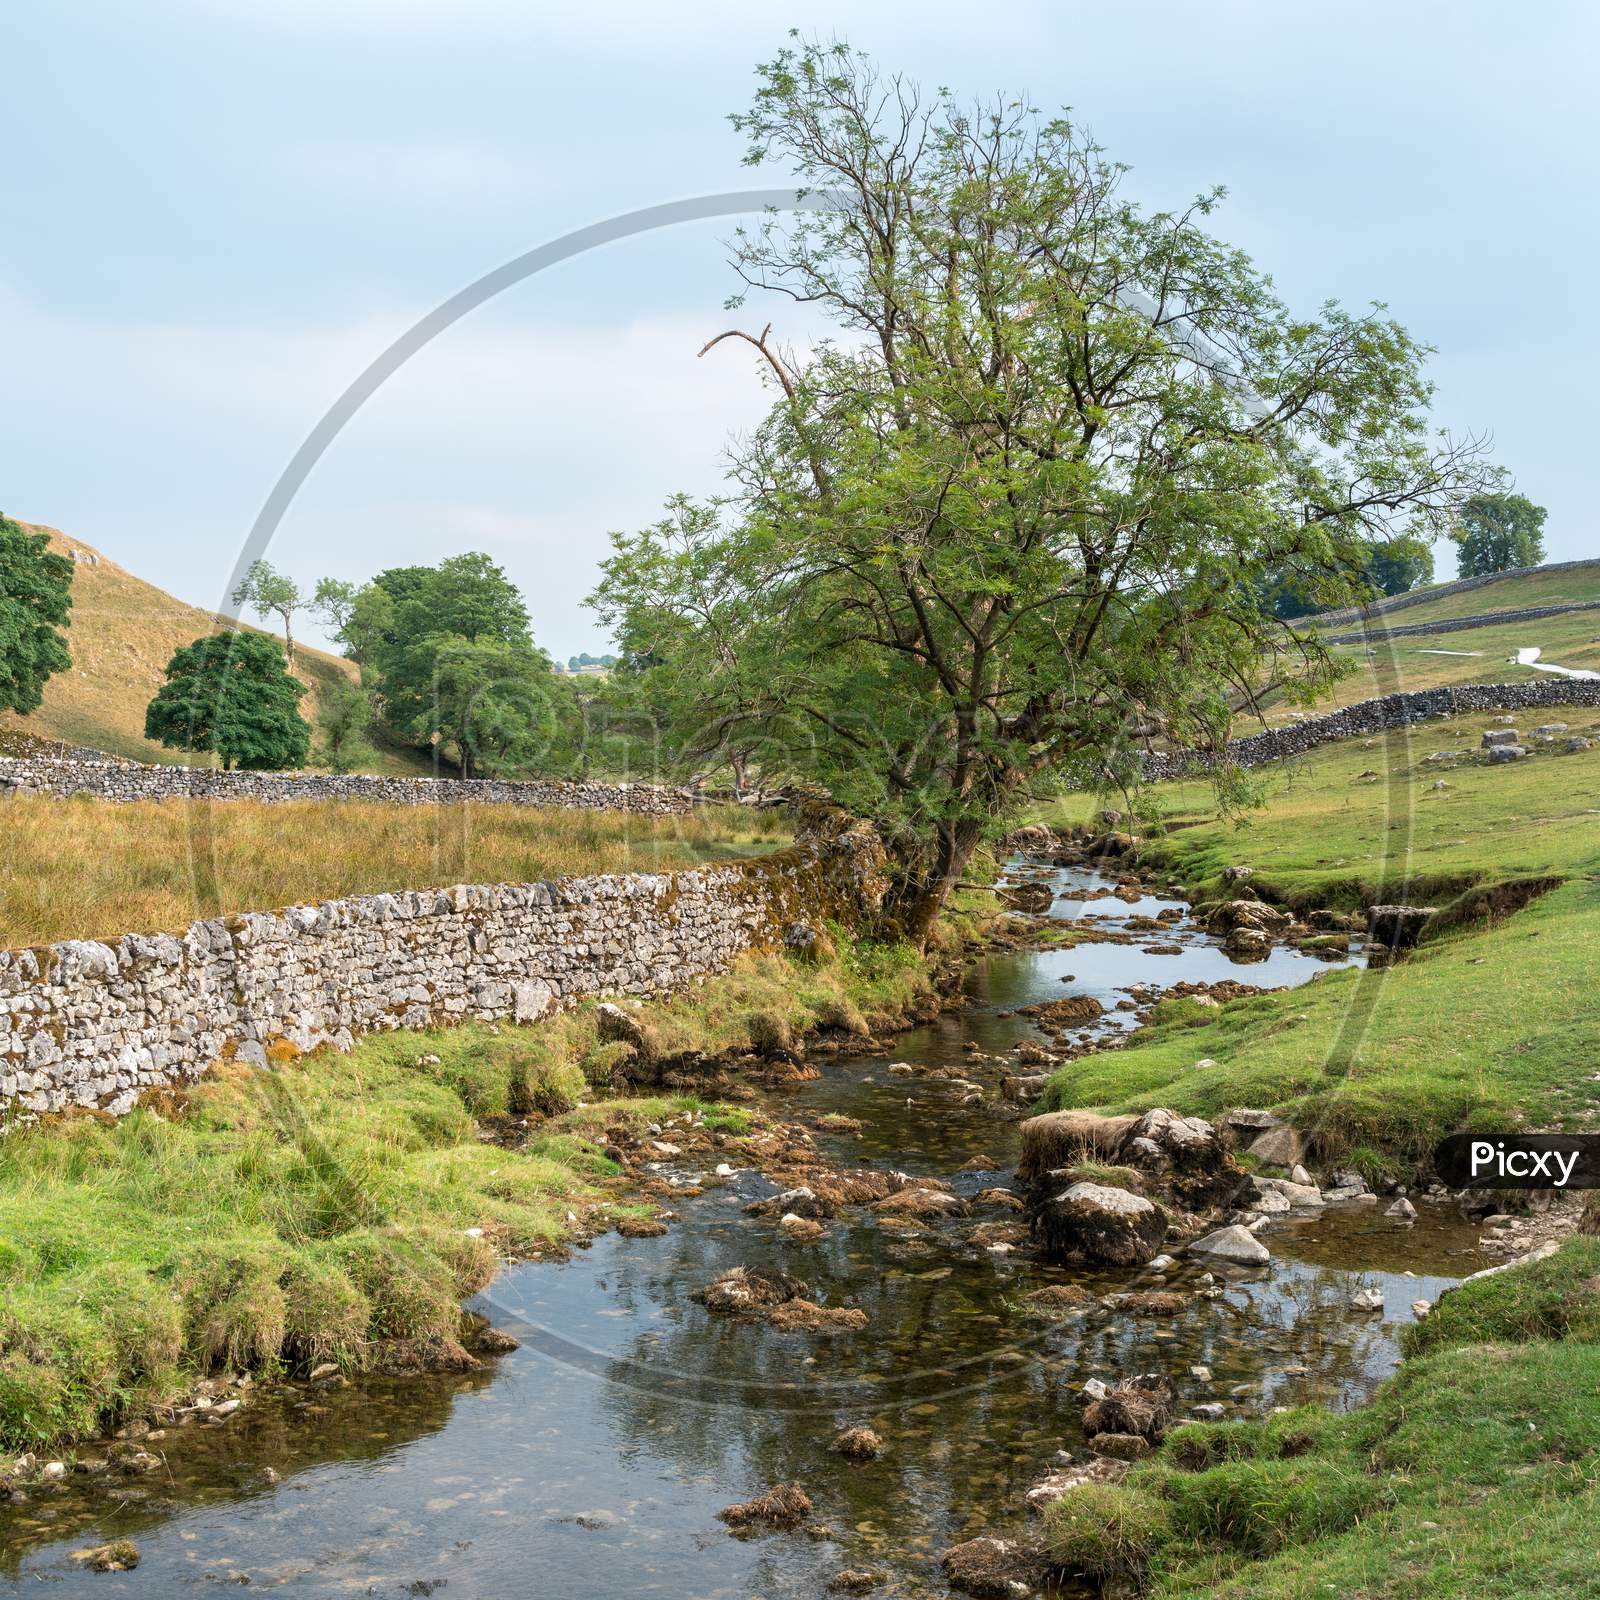 View Of The Countryside Around Malham Cove In The Yorkshire Dales National Park